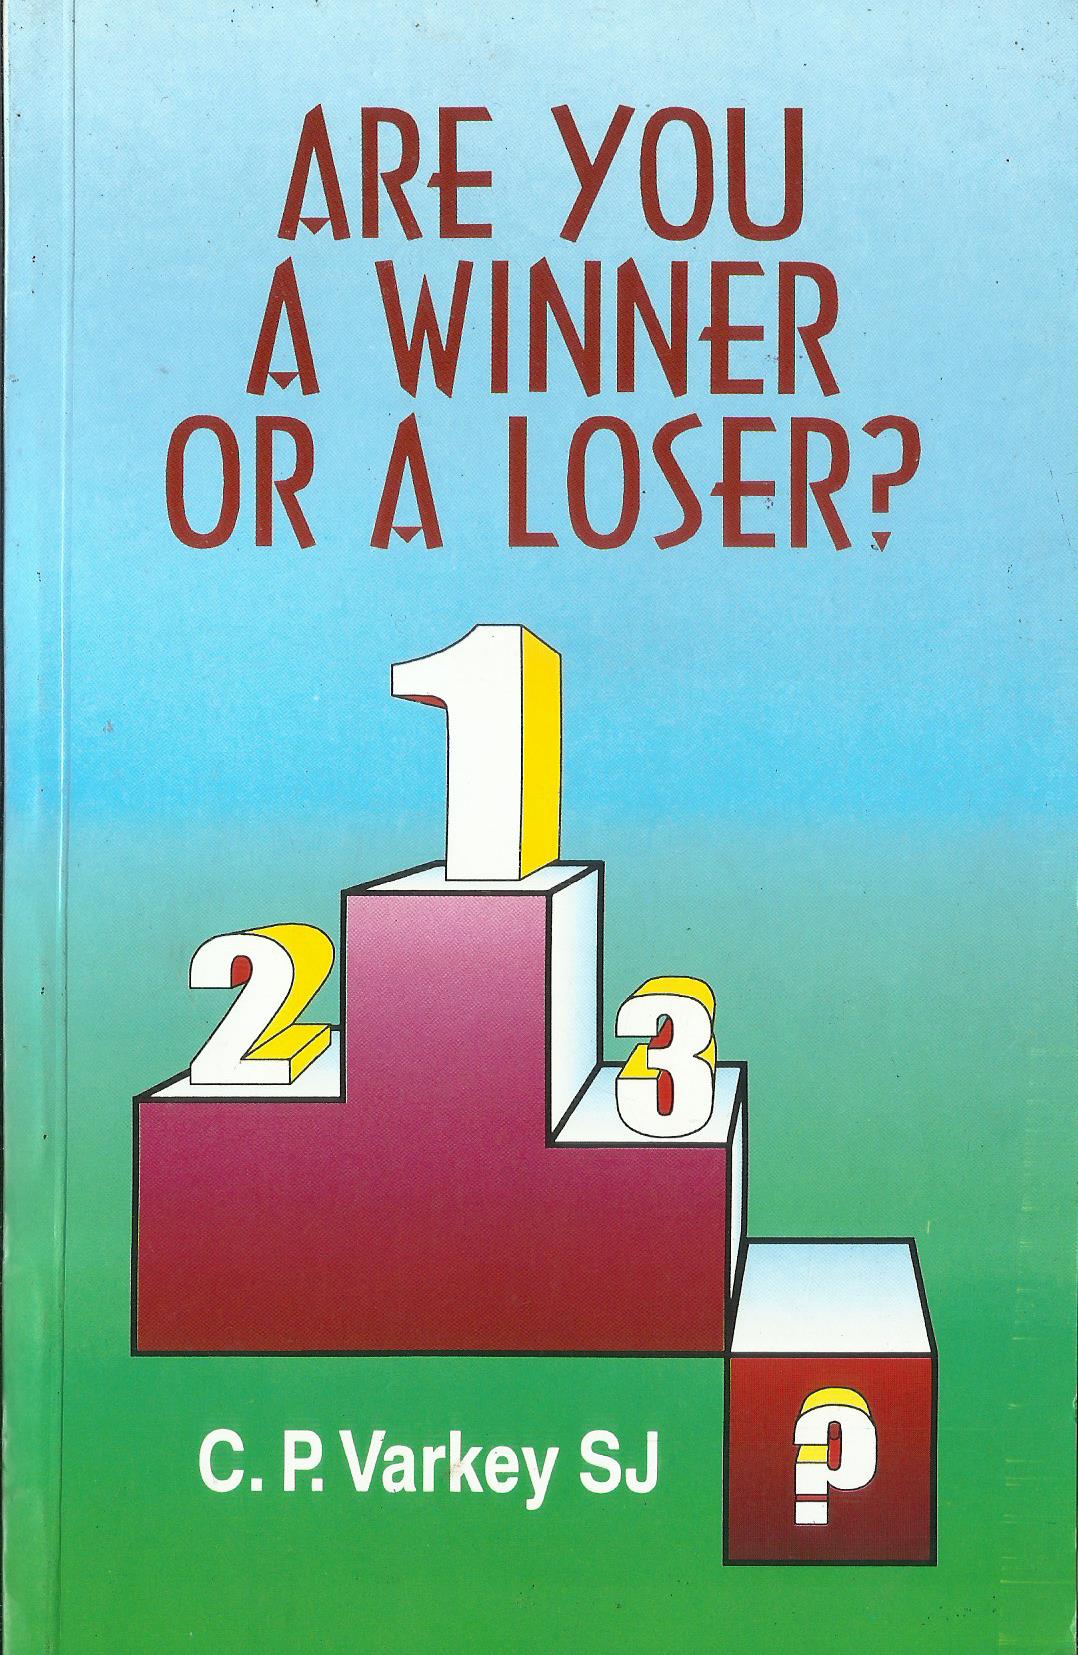 ARE YOU A WINNER OR A LOSER - sophiabuy